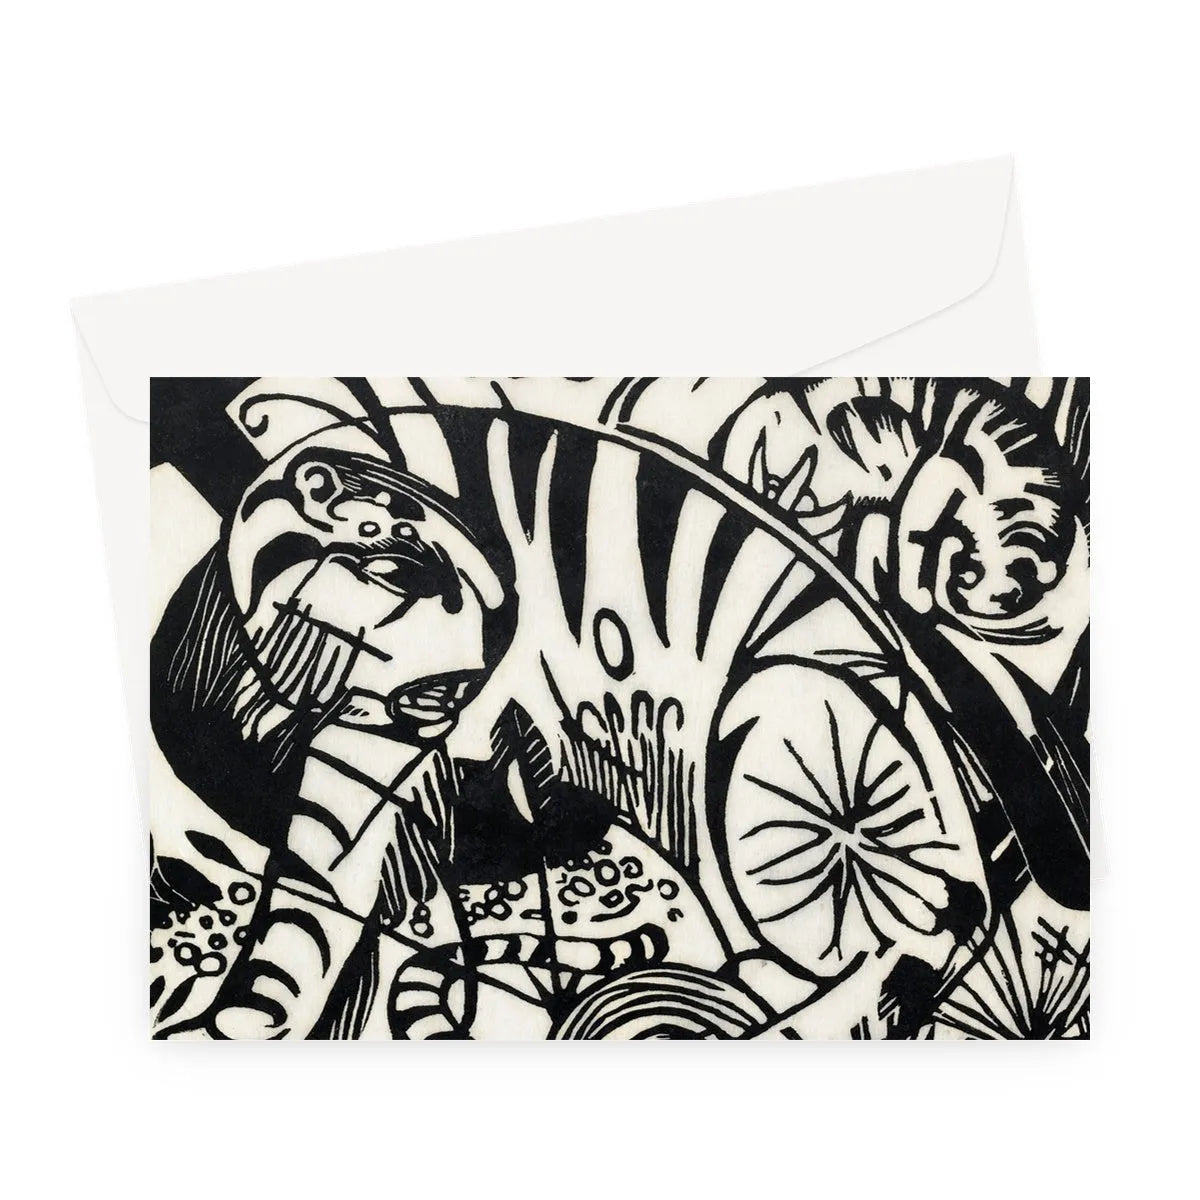 Tiger By Franz Marc Greeting Card - A5 Landscape / 1 Card - Greeting & Note Cards - Aesthetic Art